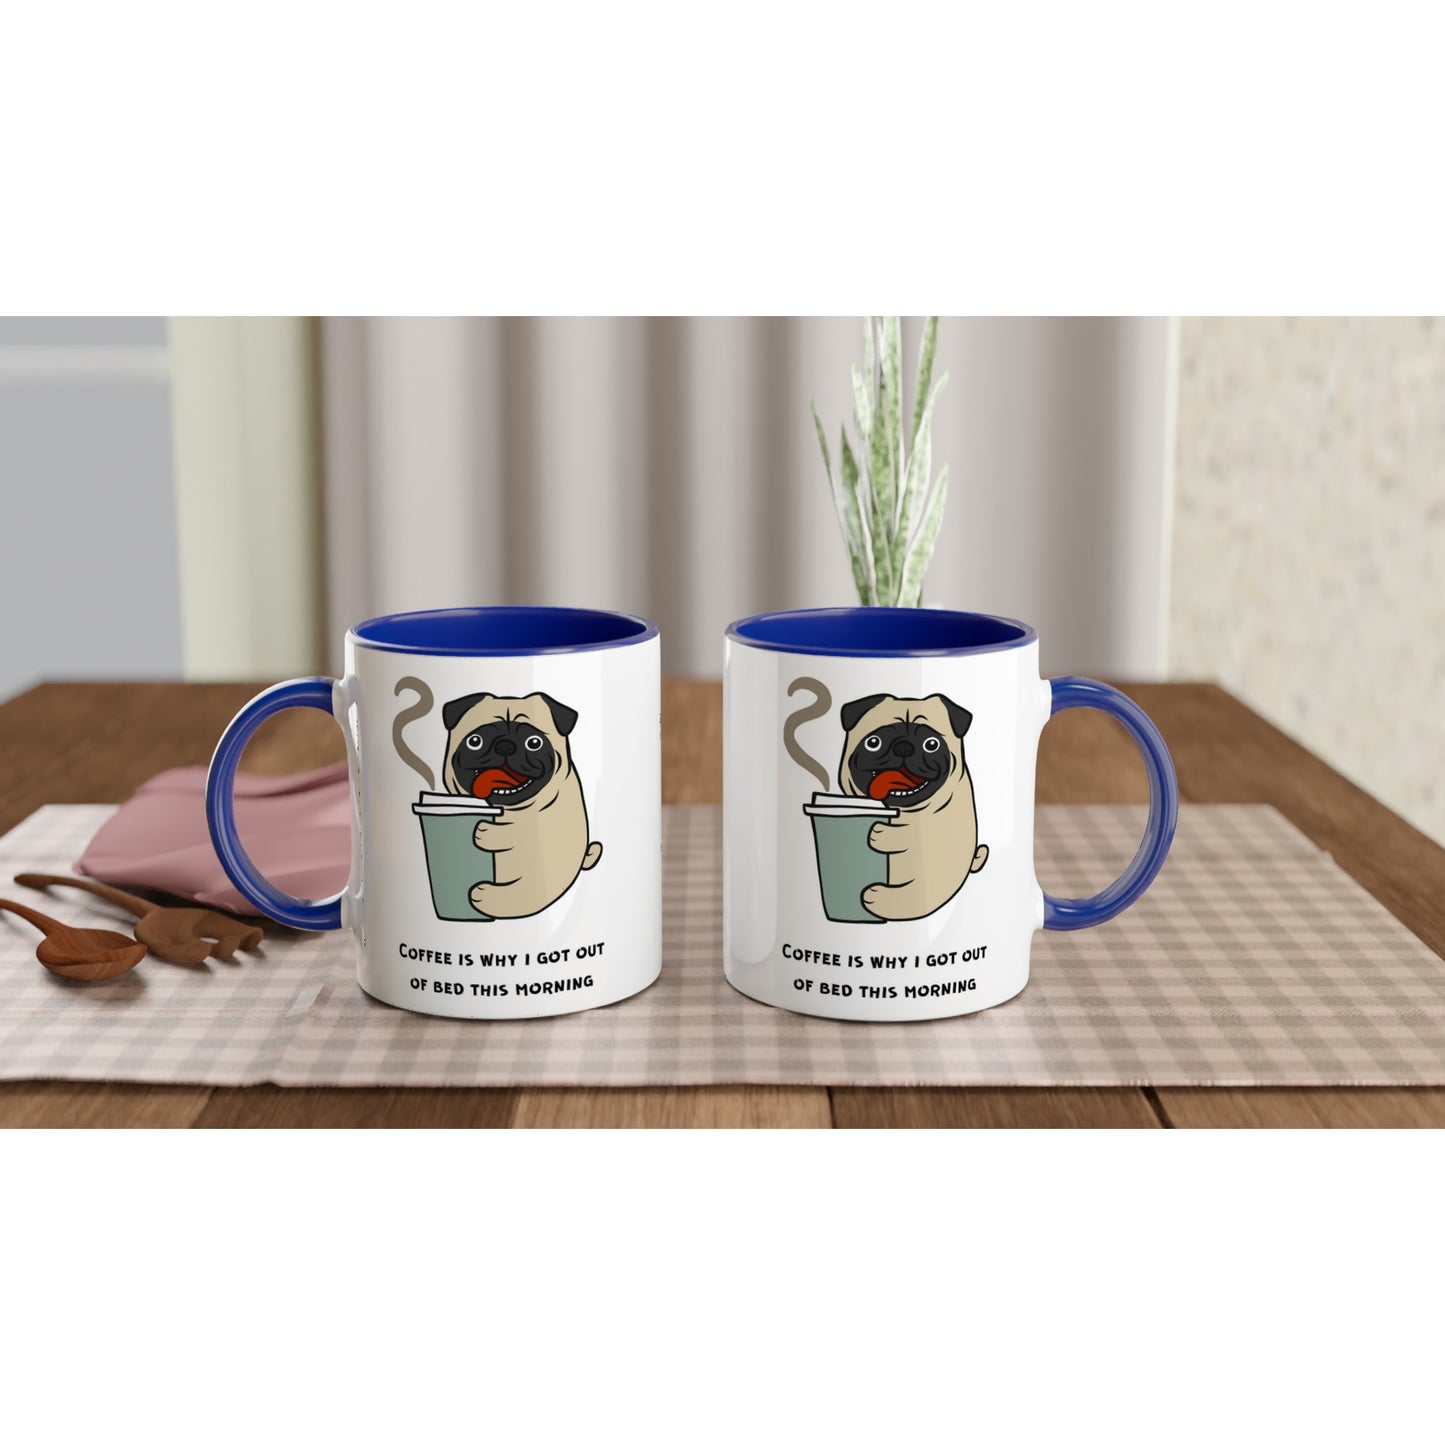 Coffee Is Why I Got Out Of Bed This Morning - White 11oz Ceramic Mug with Colour Inside Colour 11oz Mug animal coffee